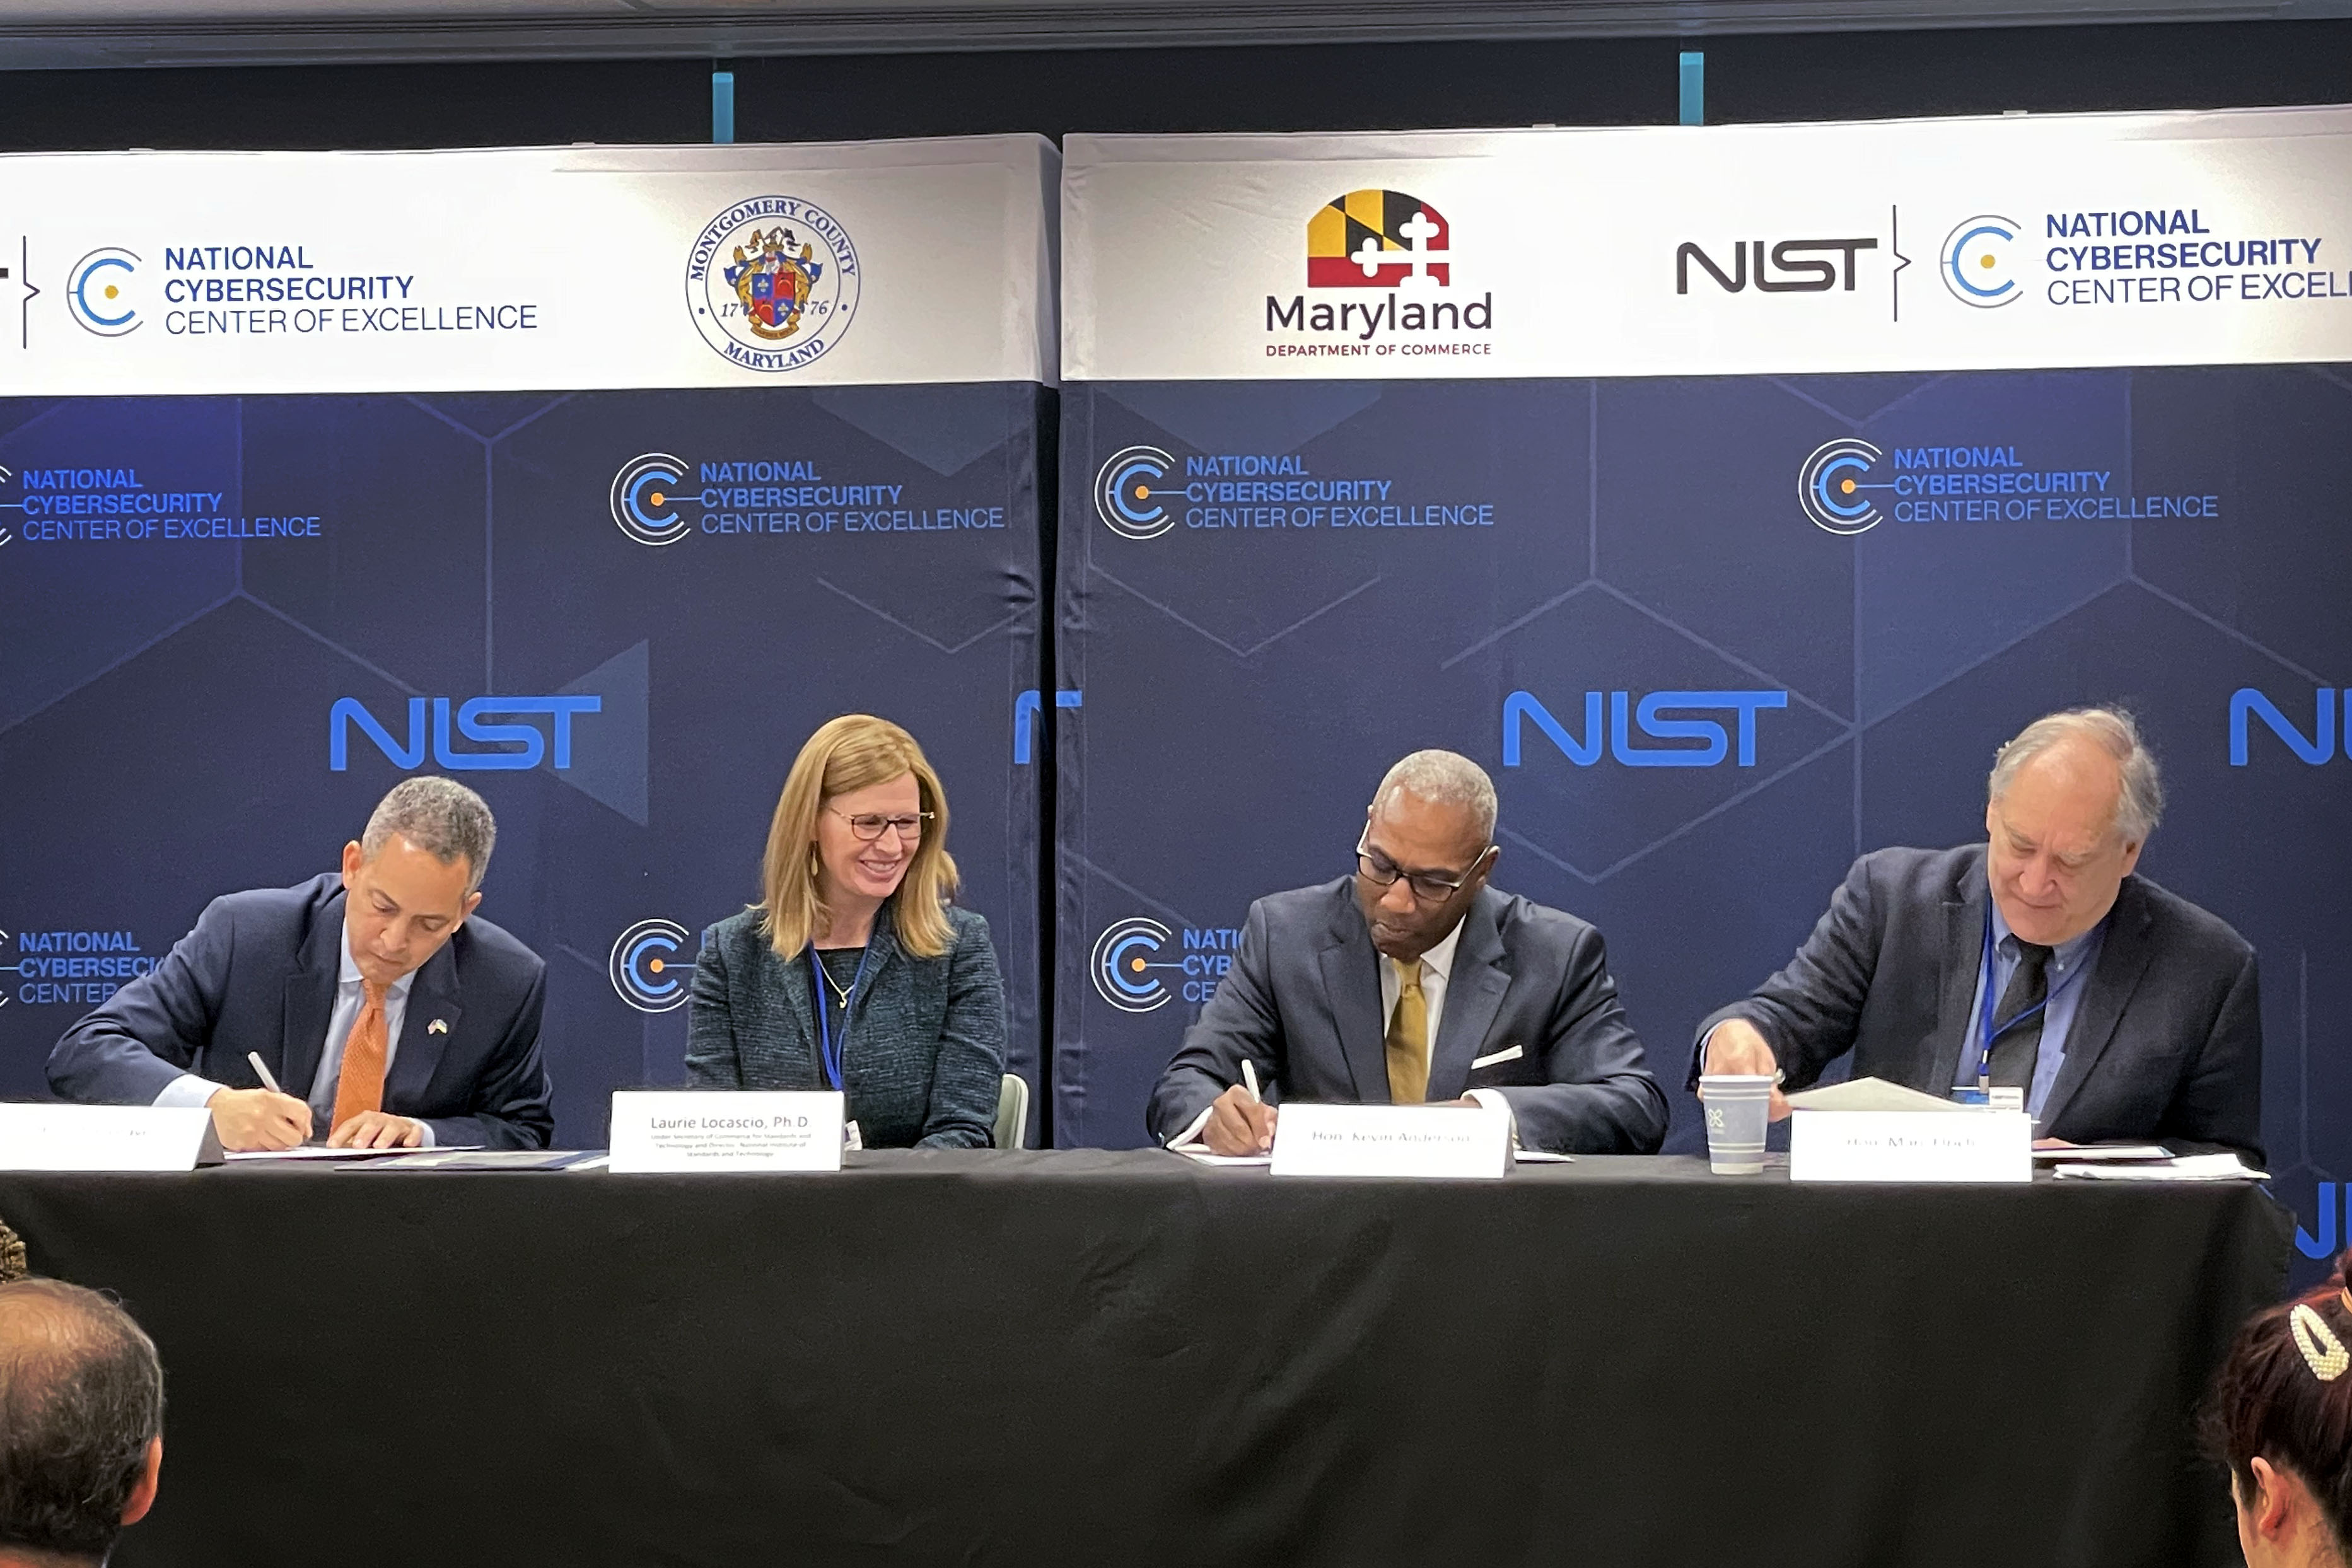 NIST’s National Cybersecurity Center of Excellence Renews Partnerships With State, County